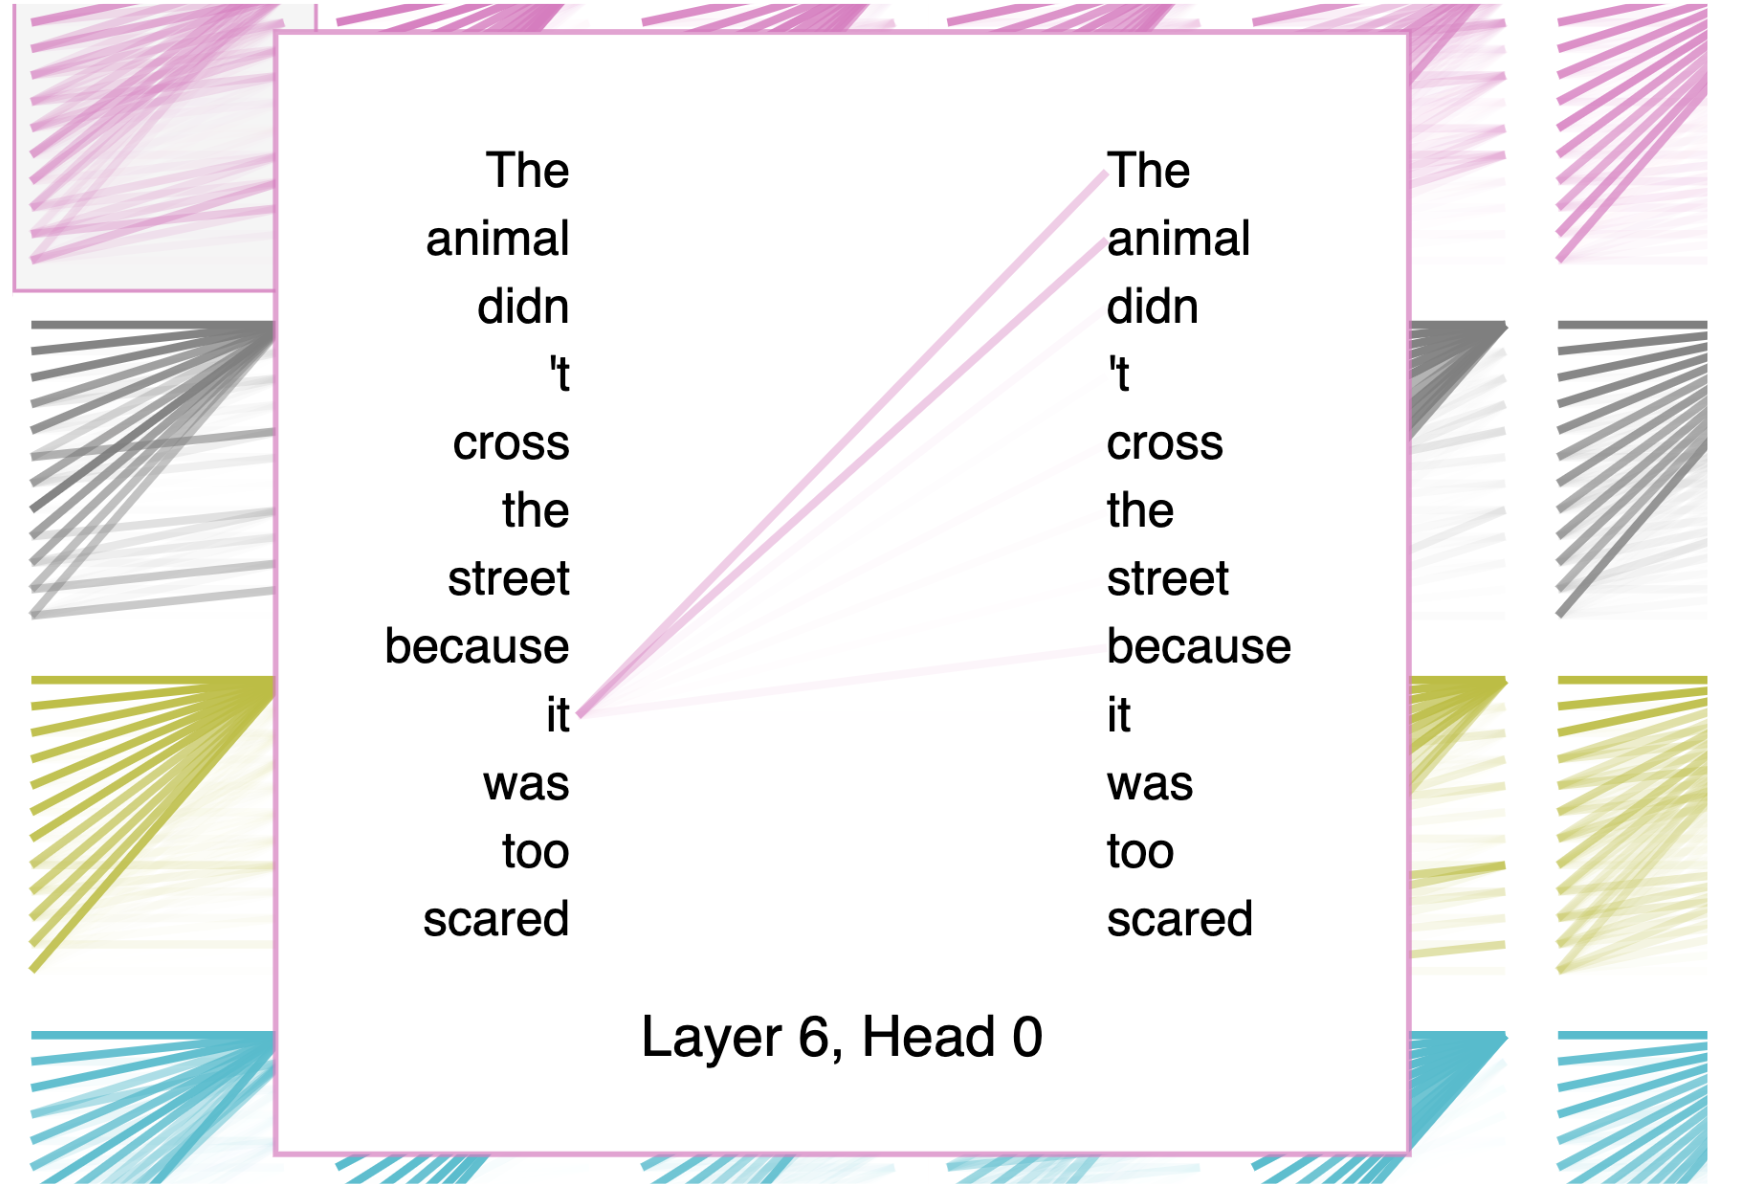 A graphic showing the BertViz representation of the sentence "the animal didn't cross the street because it was too scared." The last word, scared, was predicted by the GPT-2 model. The graphic shows that GPT-2 correlates "it" to the animal.